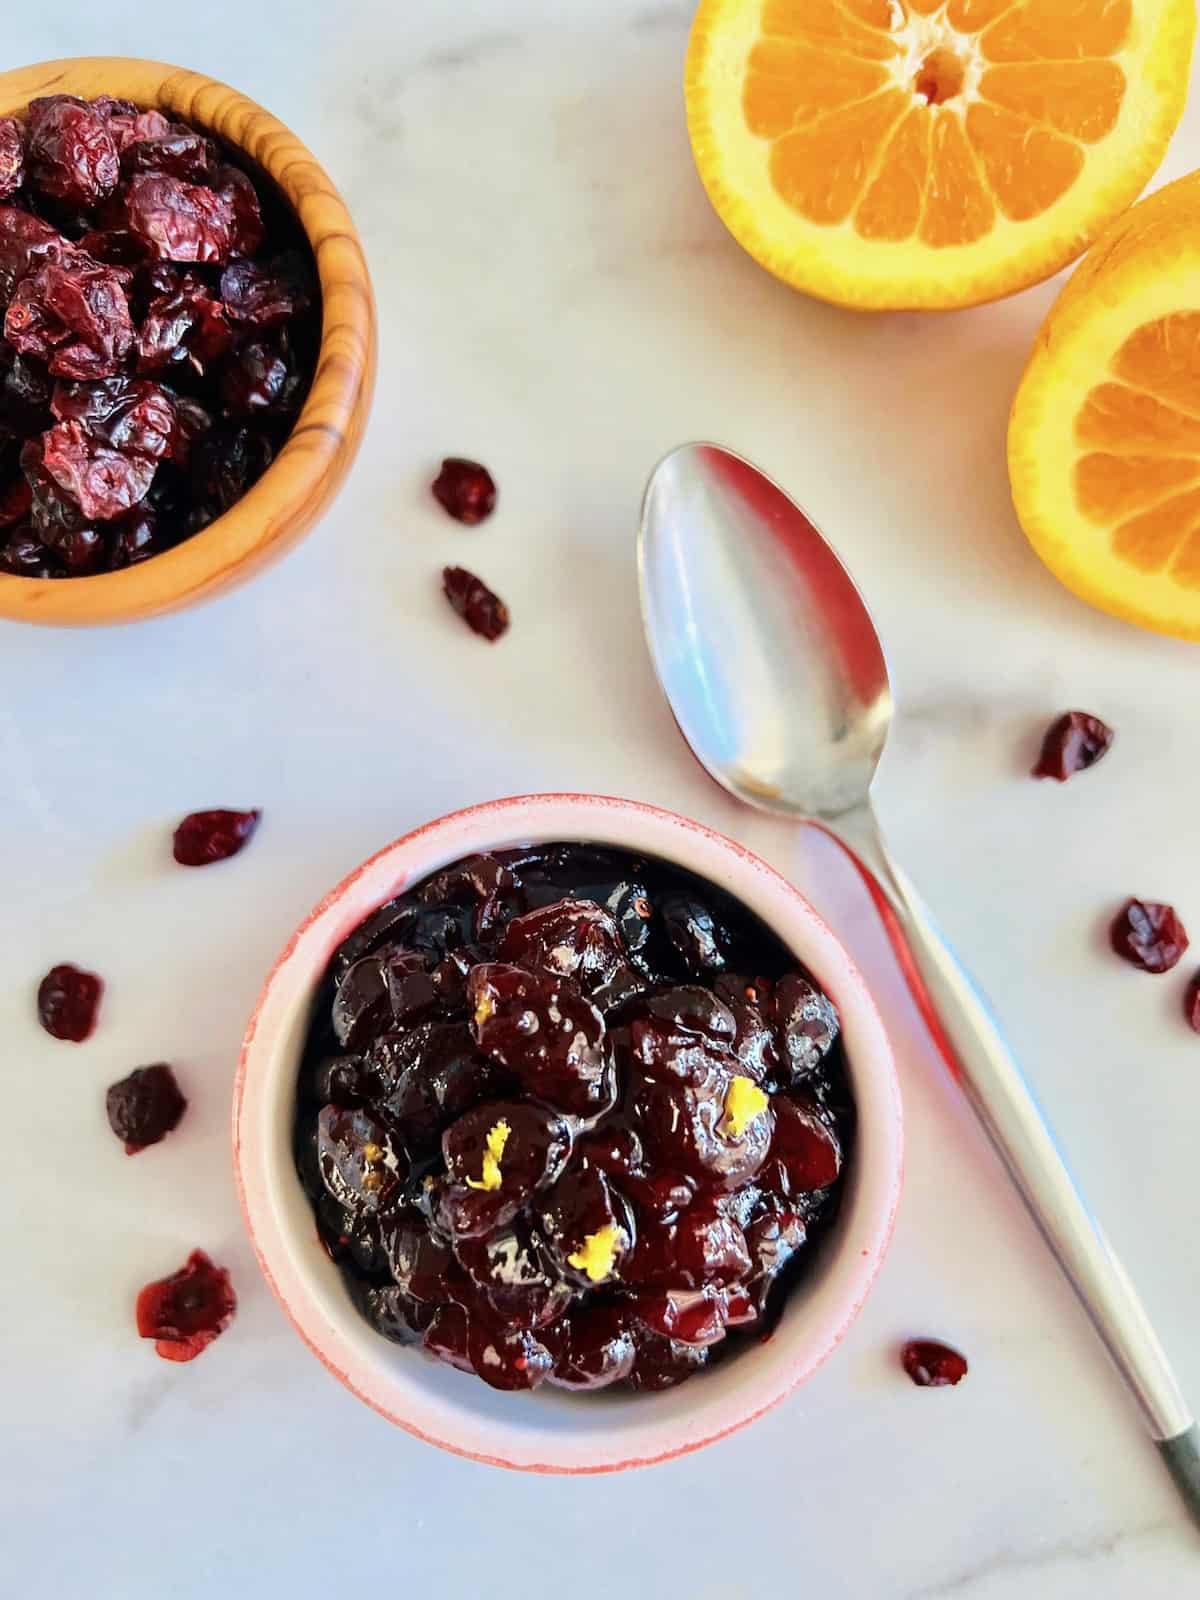 Cranberry sauce in a small bowl ready to eat with a spoon surrounded by a bowl of dried cranberries and a fresh orange.